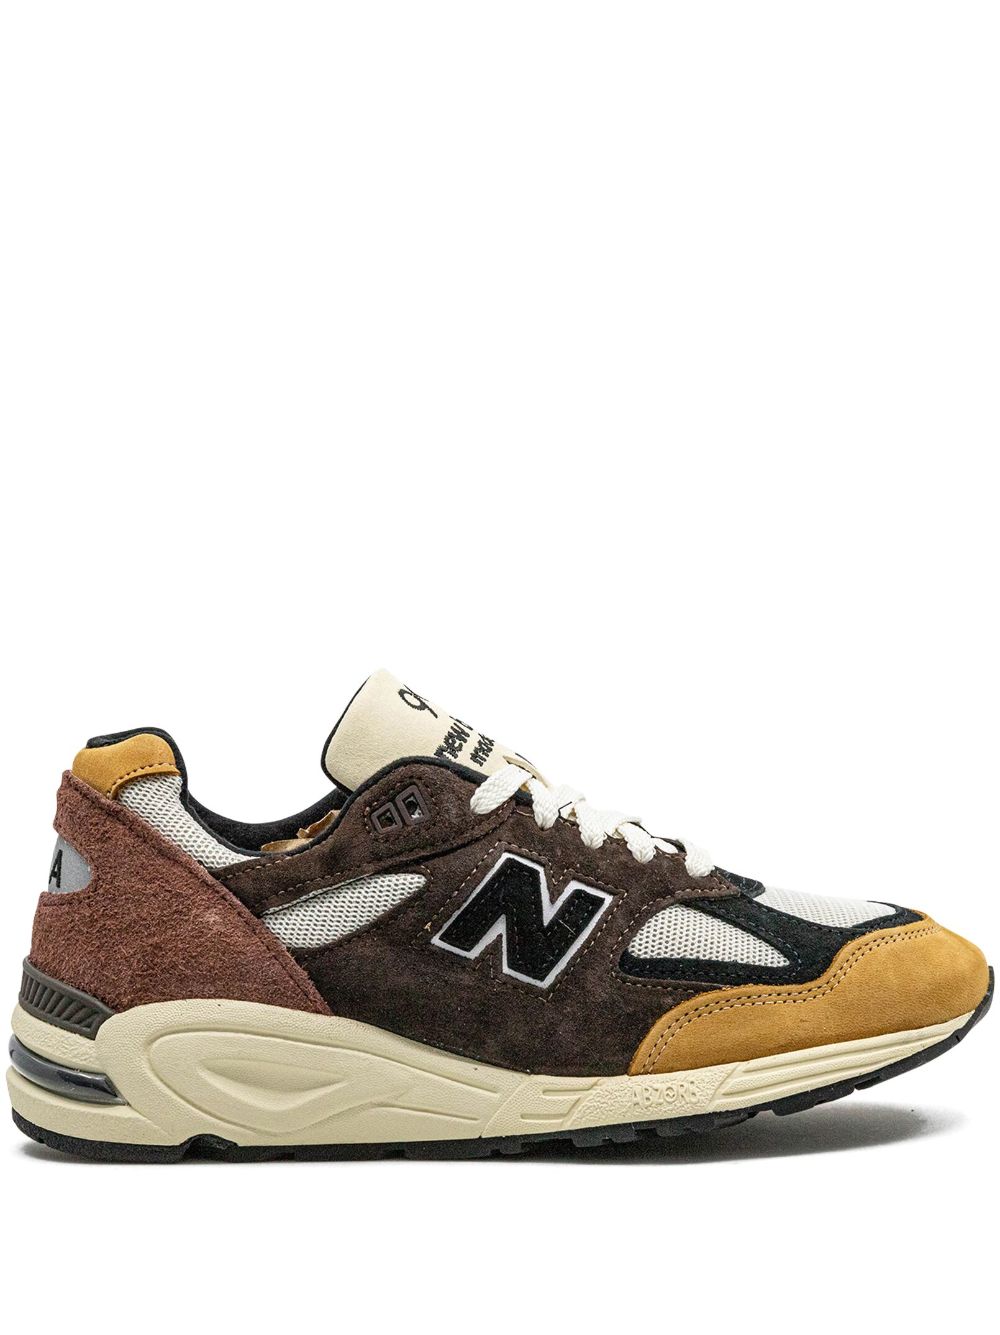 New Balance 990v2 Made In USA "Brown" sneakers